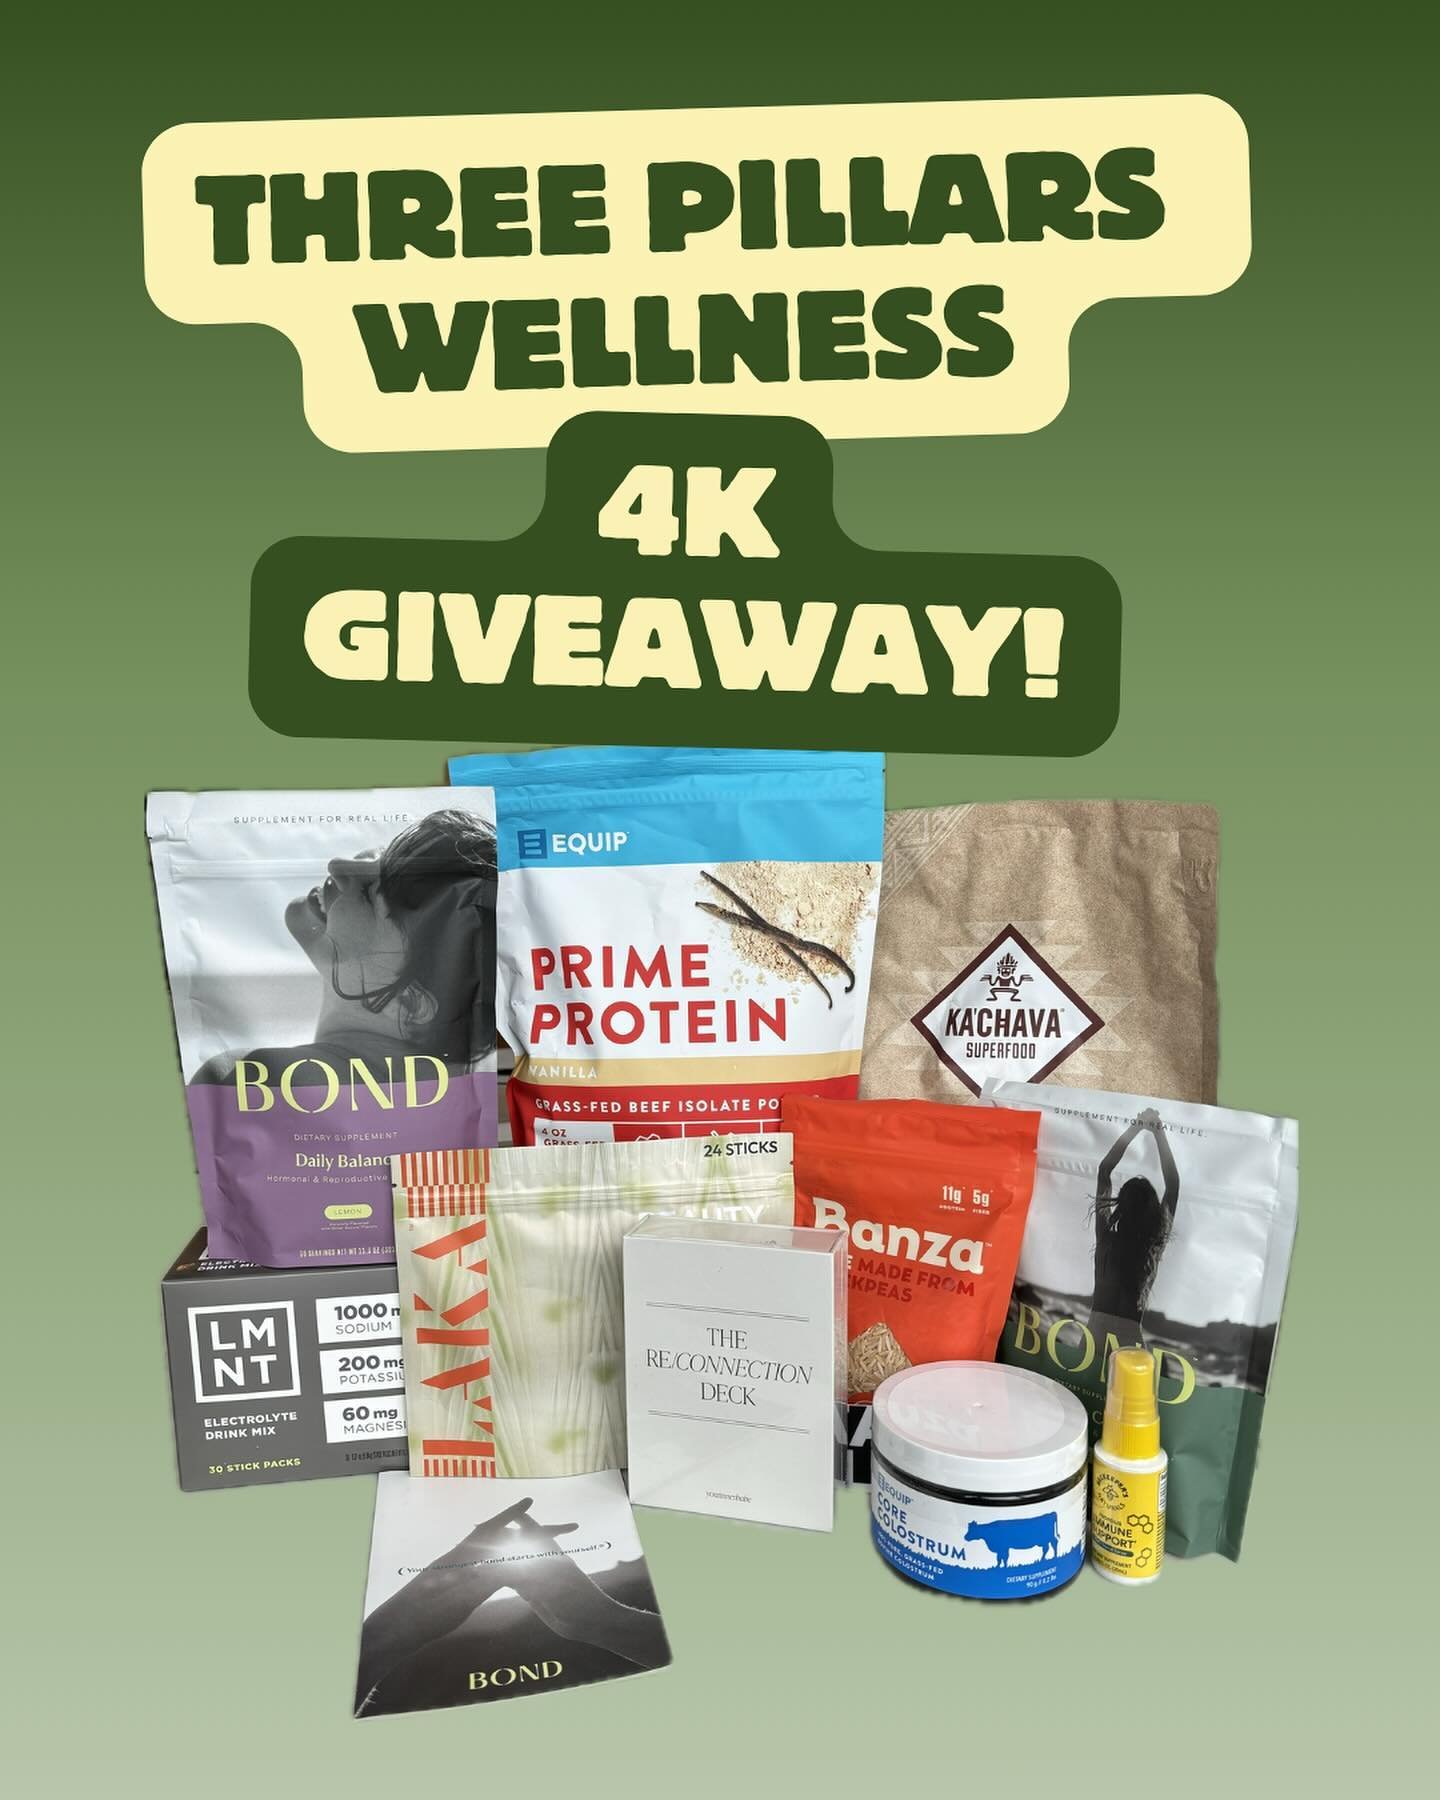 GIVEAWAY ✨
LIKE POST!
FOLLOW @THREE_PILLARS_WELLNESS
TAG A FRIEND IN COMMENTS = 1 ENTRY
STORY SHARE &amp; TAG @three_pillars_wellness = 2 ENTRIES
Good luck ✨✨✨ USA only